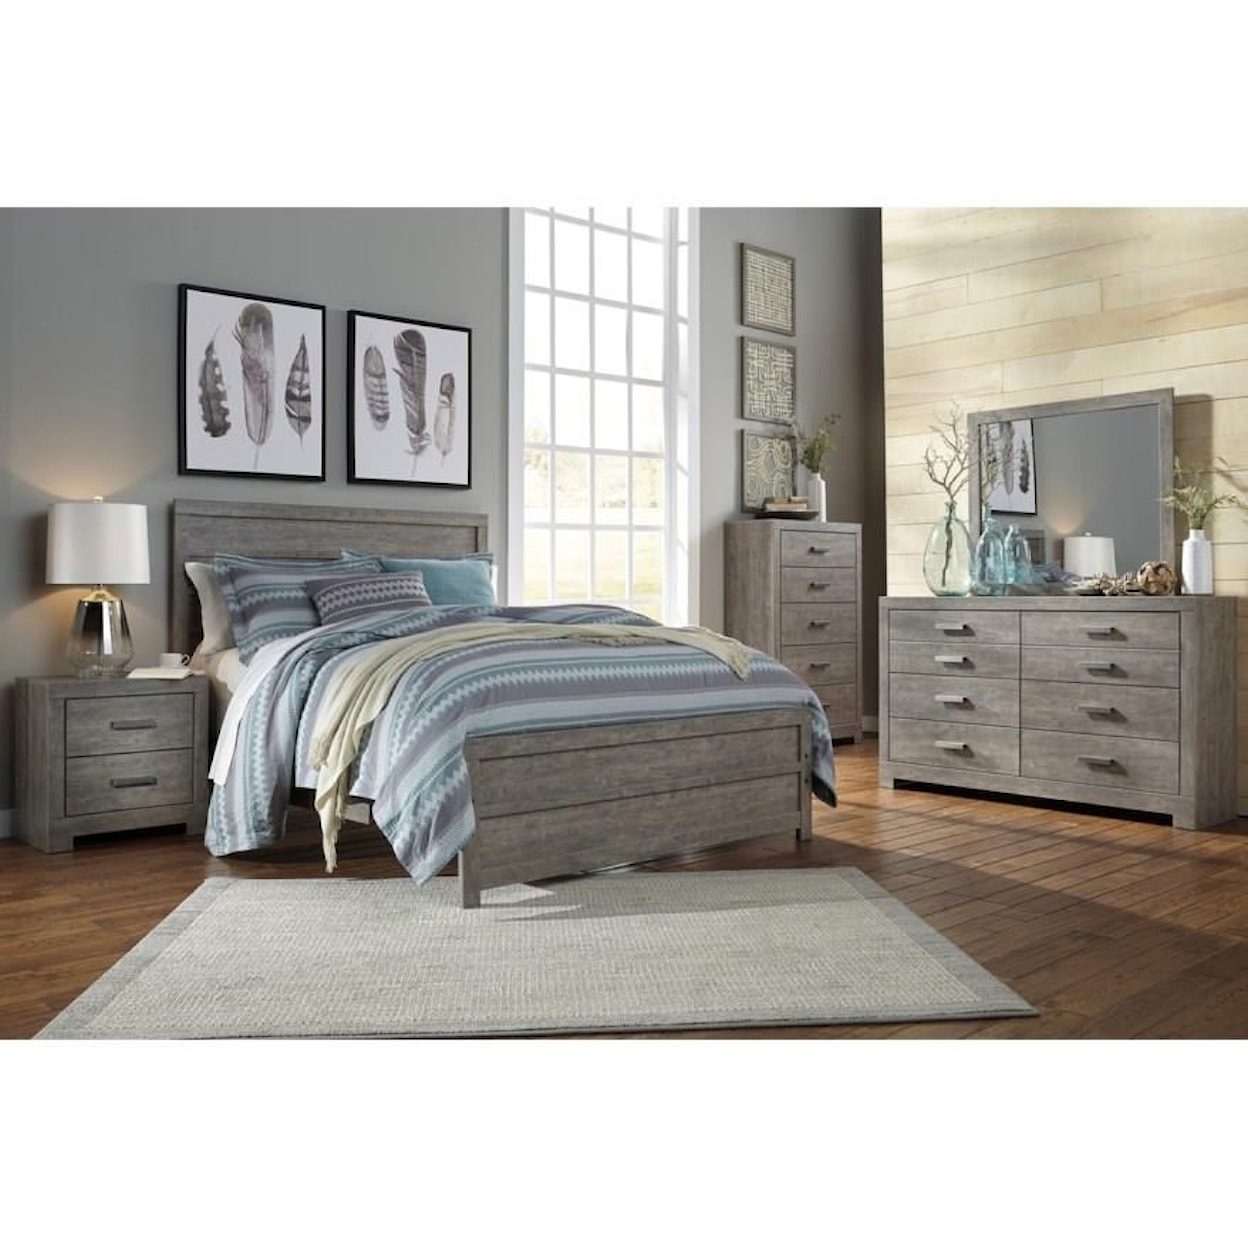 Signature Design by Ashley Culverbach 5PC King Bedroom Group